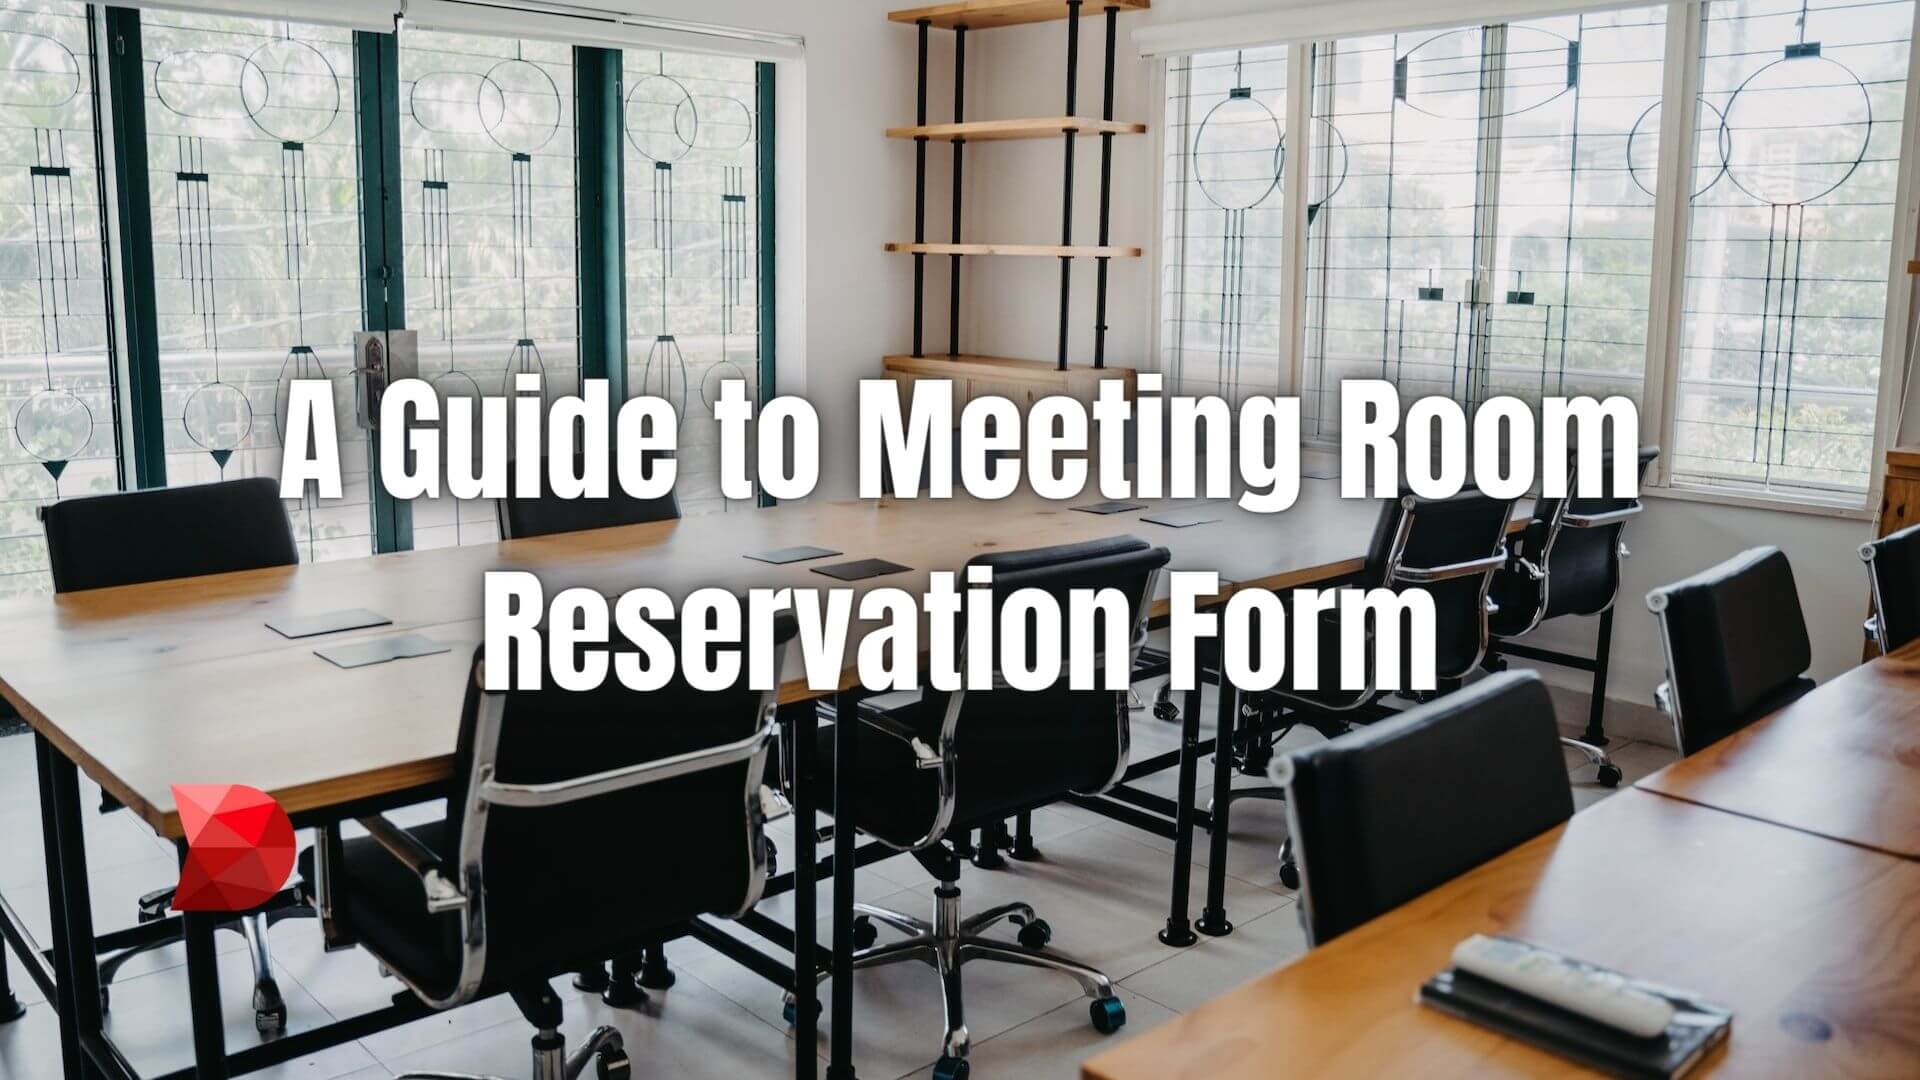 Looking for a way to simplify the process of meeting room reservations? An online conference room reservation form is the answer. Learn why!